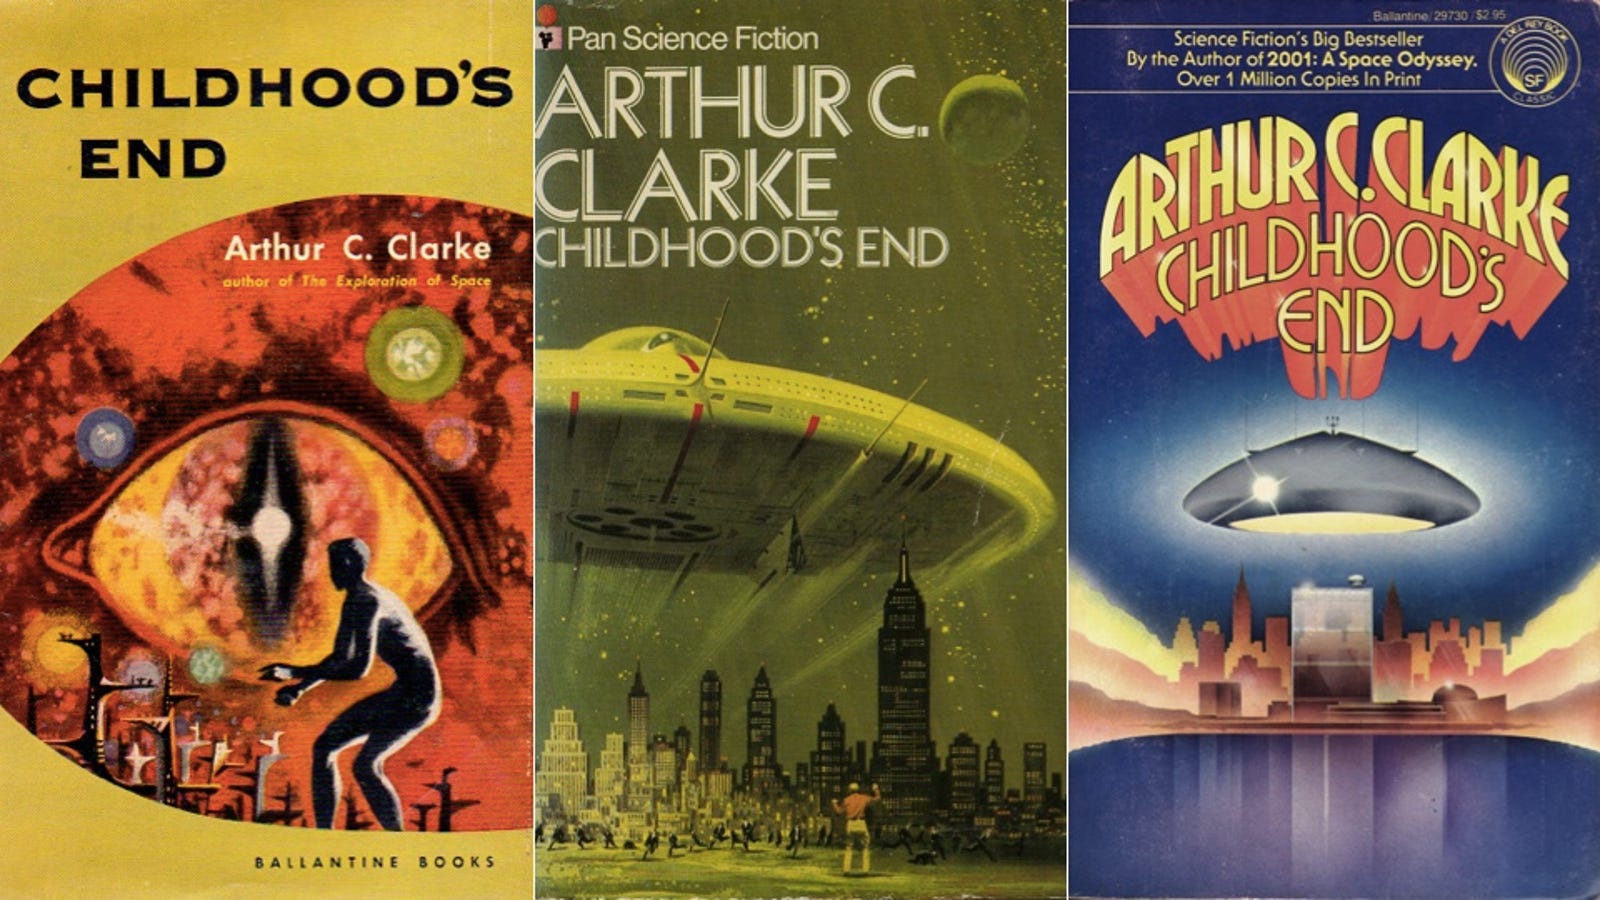 Syfy Turning Arthur C. Clarke's Childhood's End Into A Miniseries